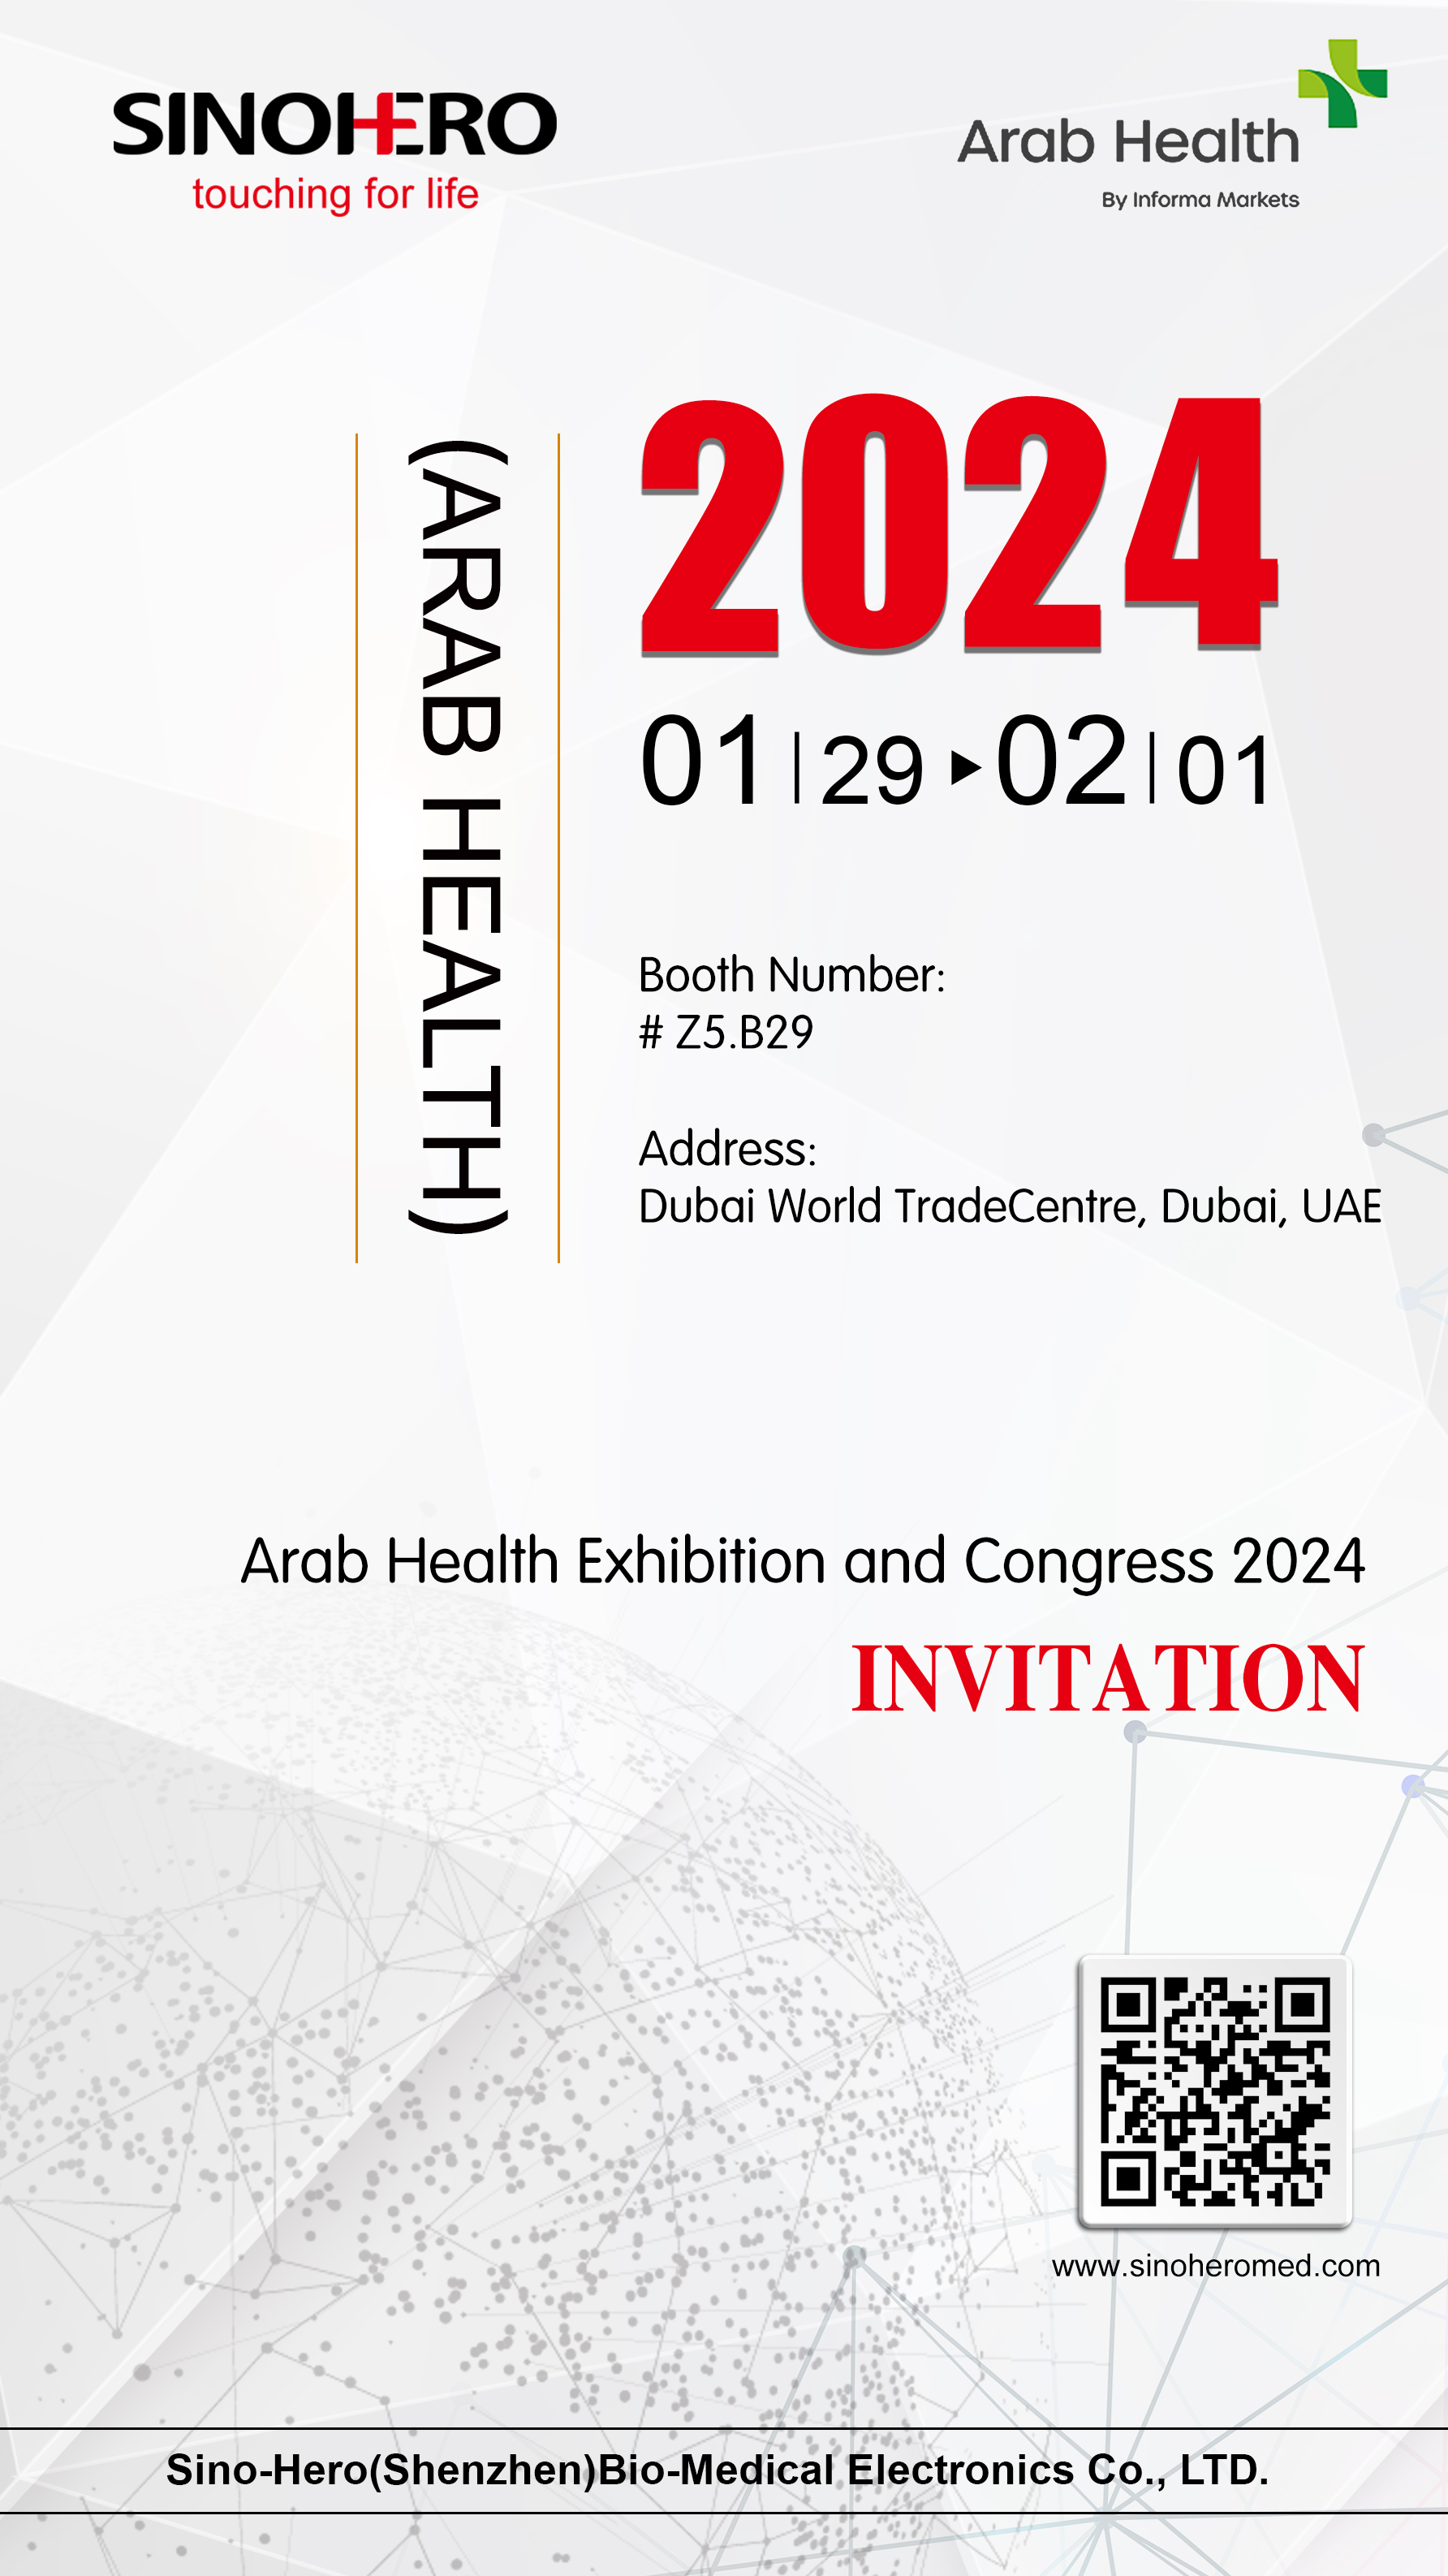 SHINOHERO will attend in the Arab Health Exhibition and Congress 2024